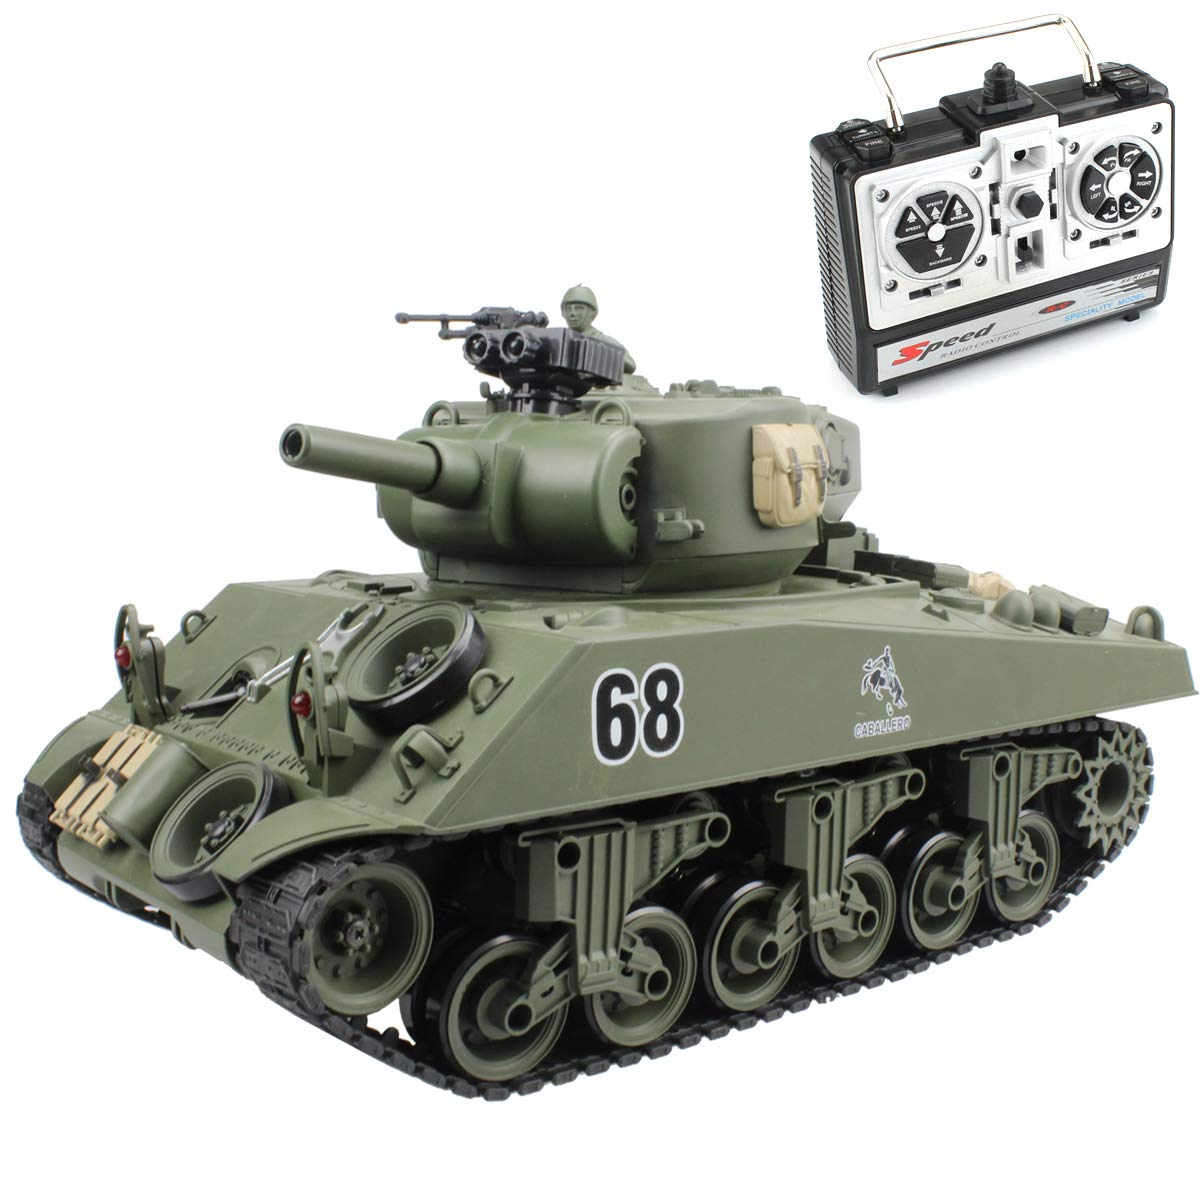 Top 9 Best Remote Control Tanks Battle Reviews in 2023 6